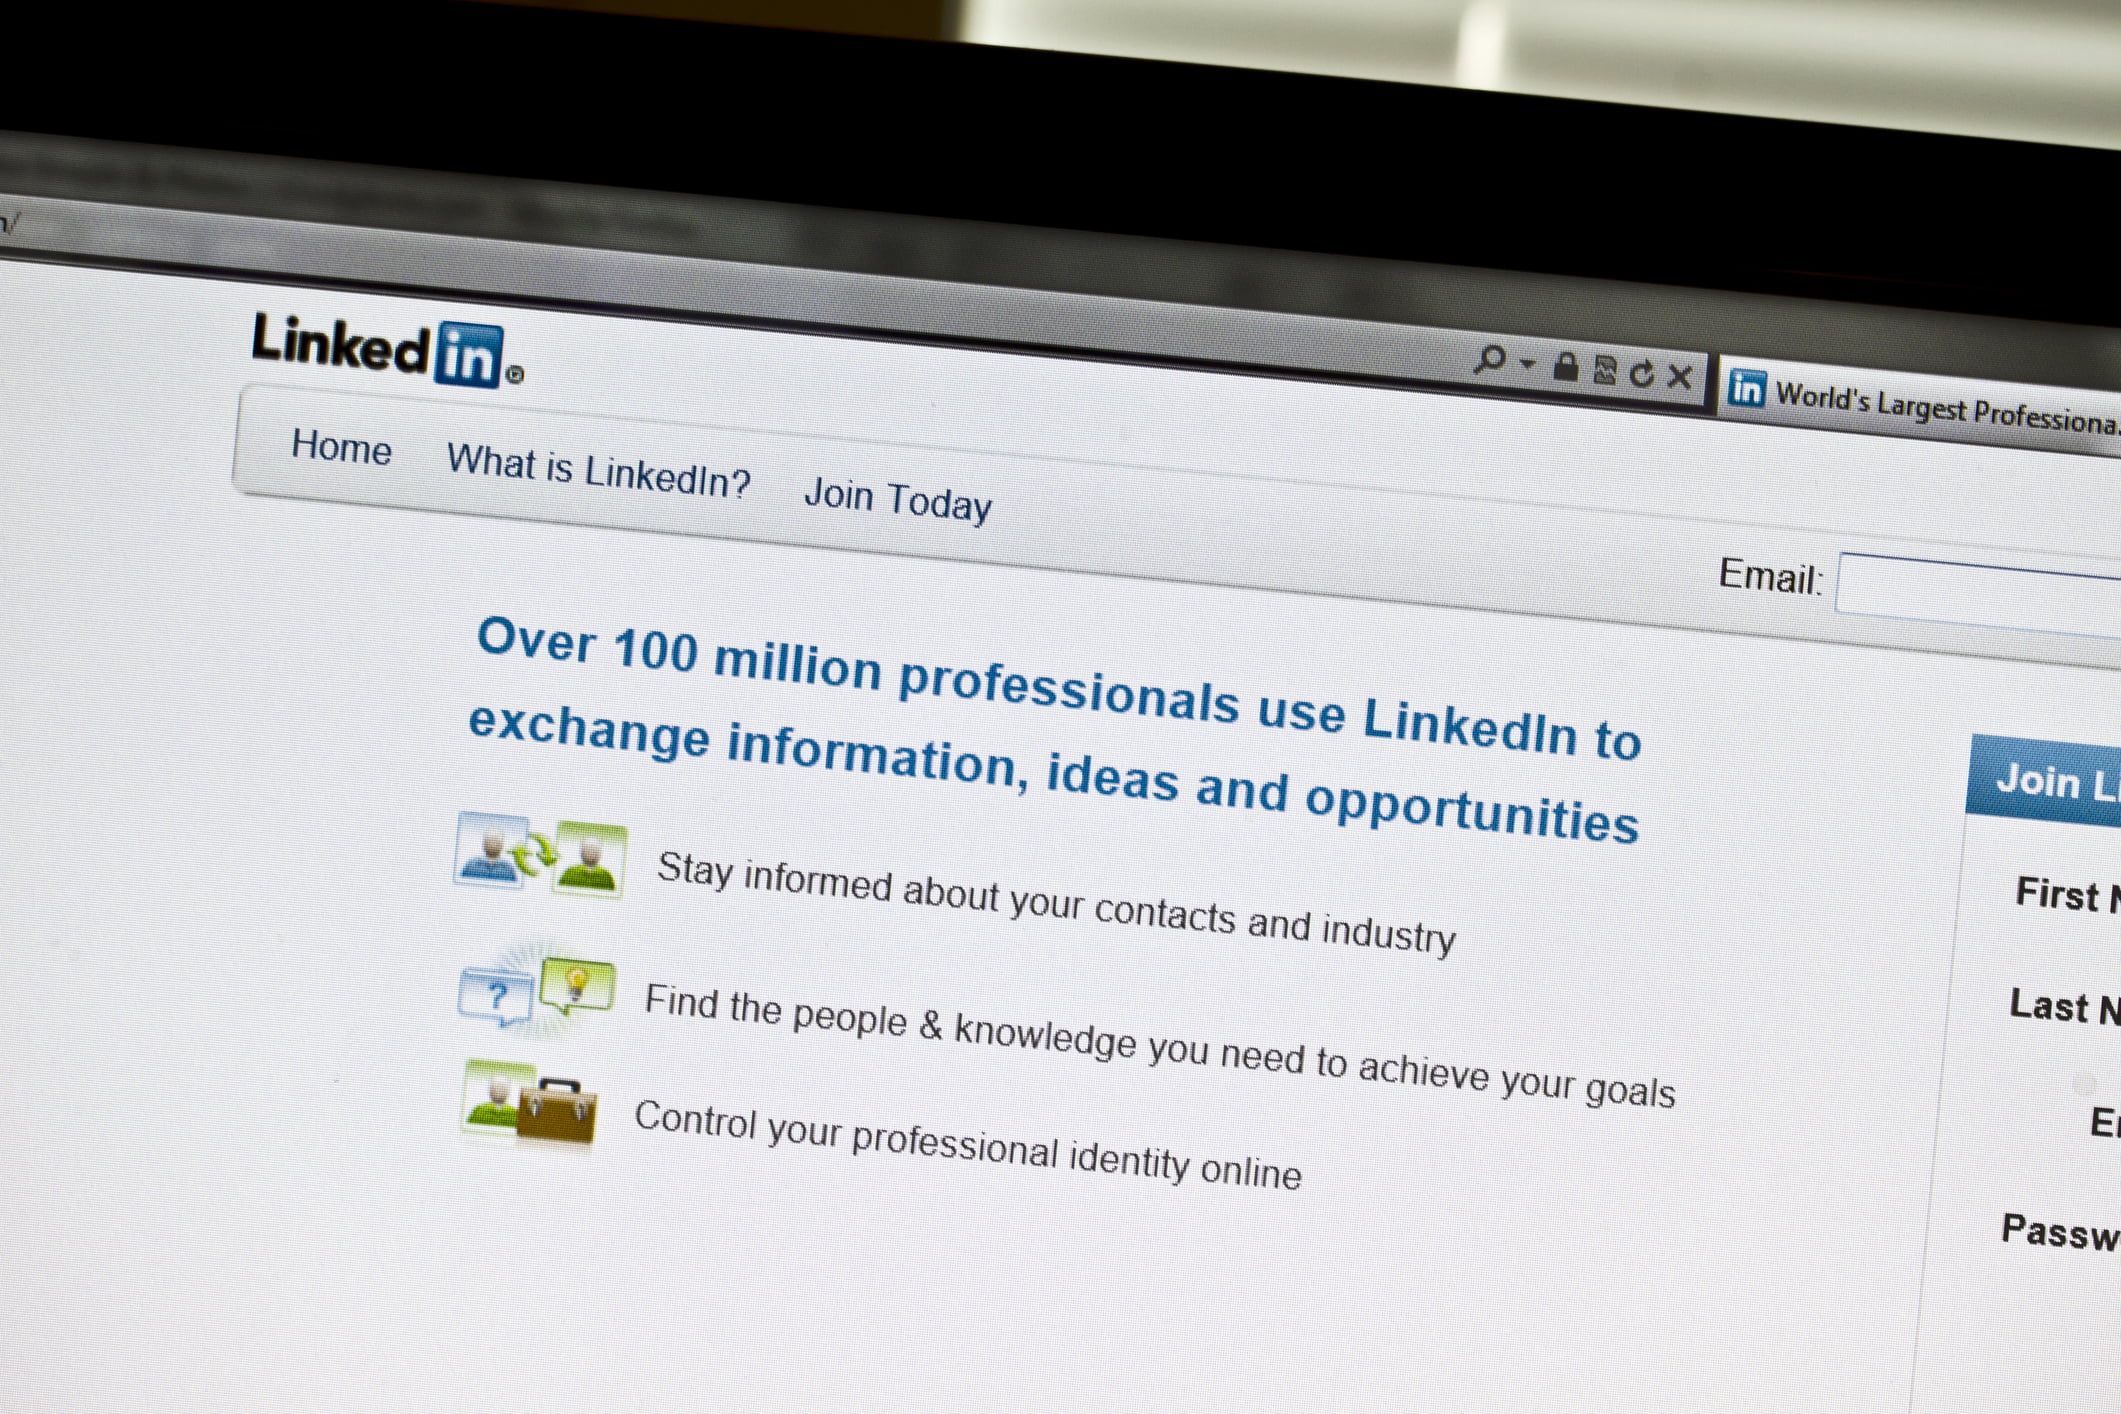 linkedin marketing automation tips for green businesses